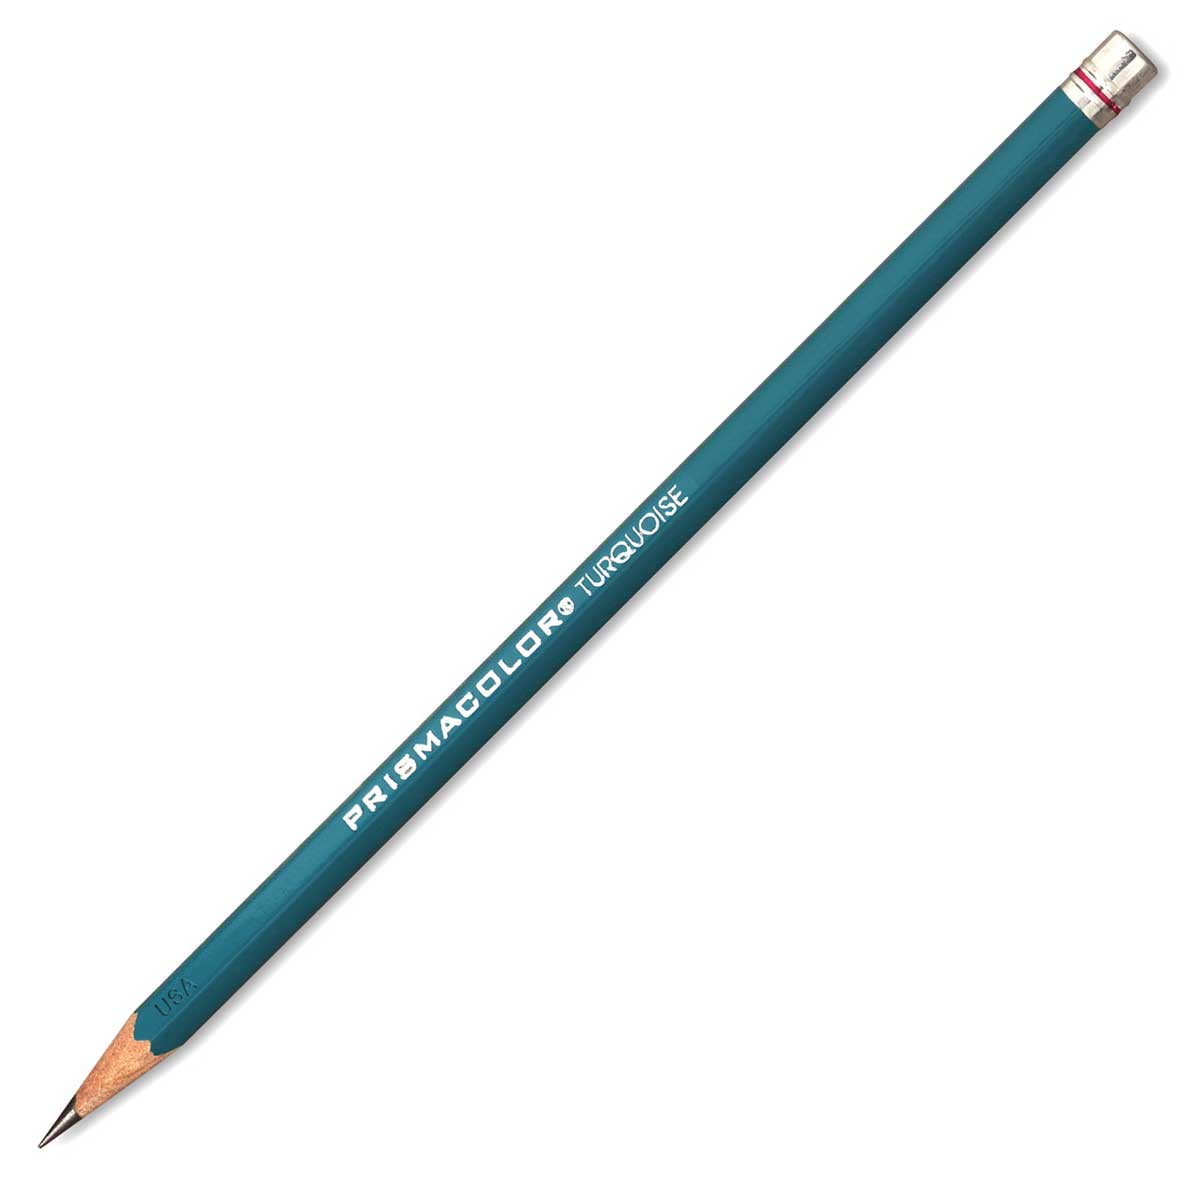 Prismacolor Turquoise Drawing Pencil - 2B